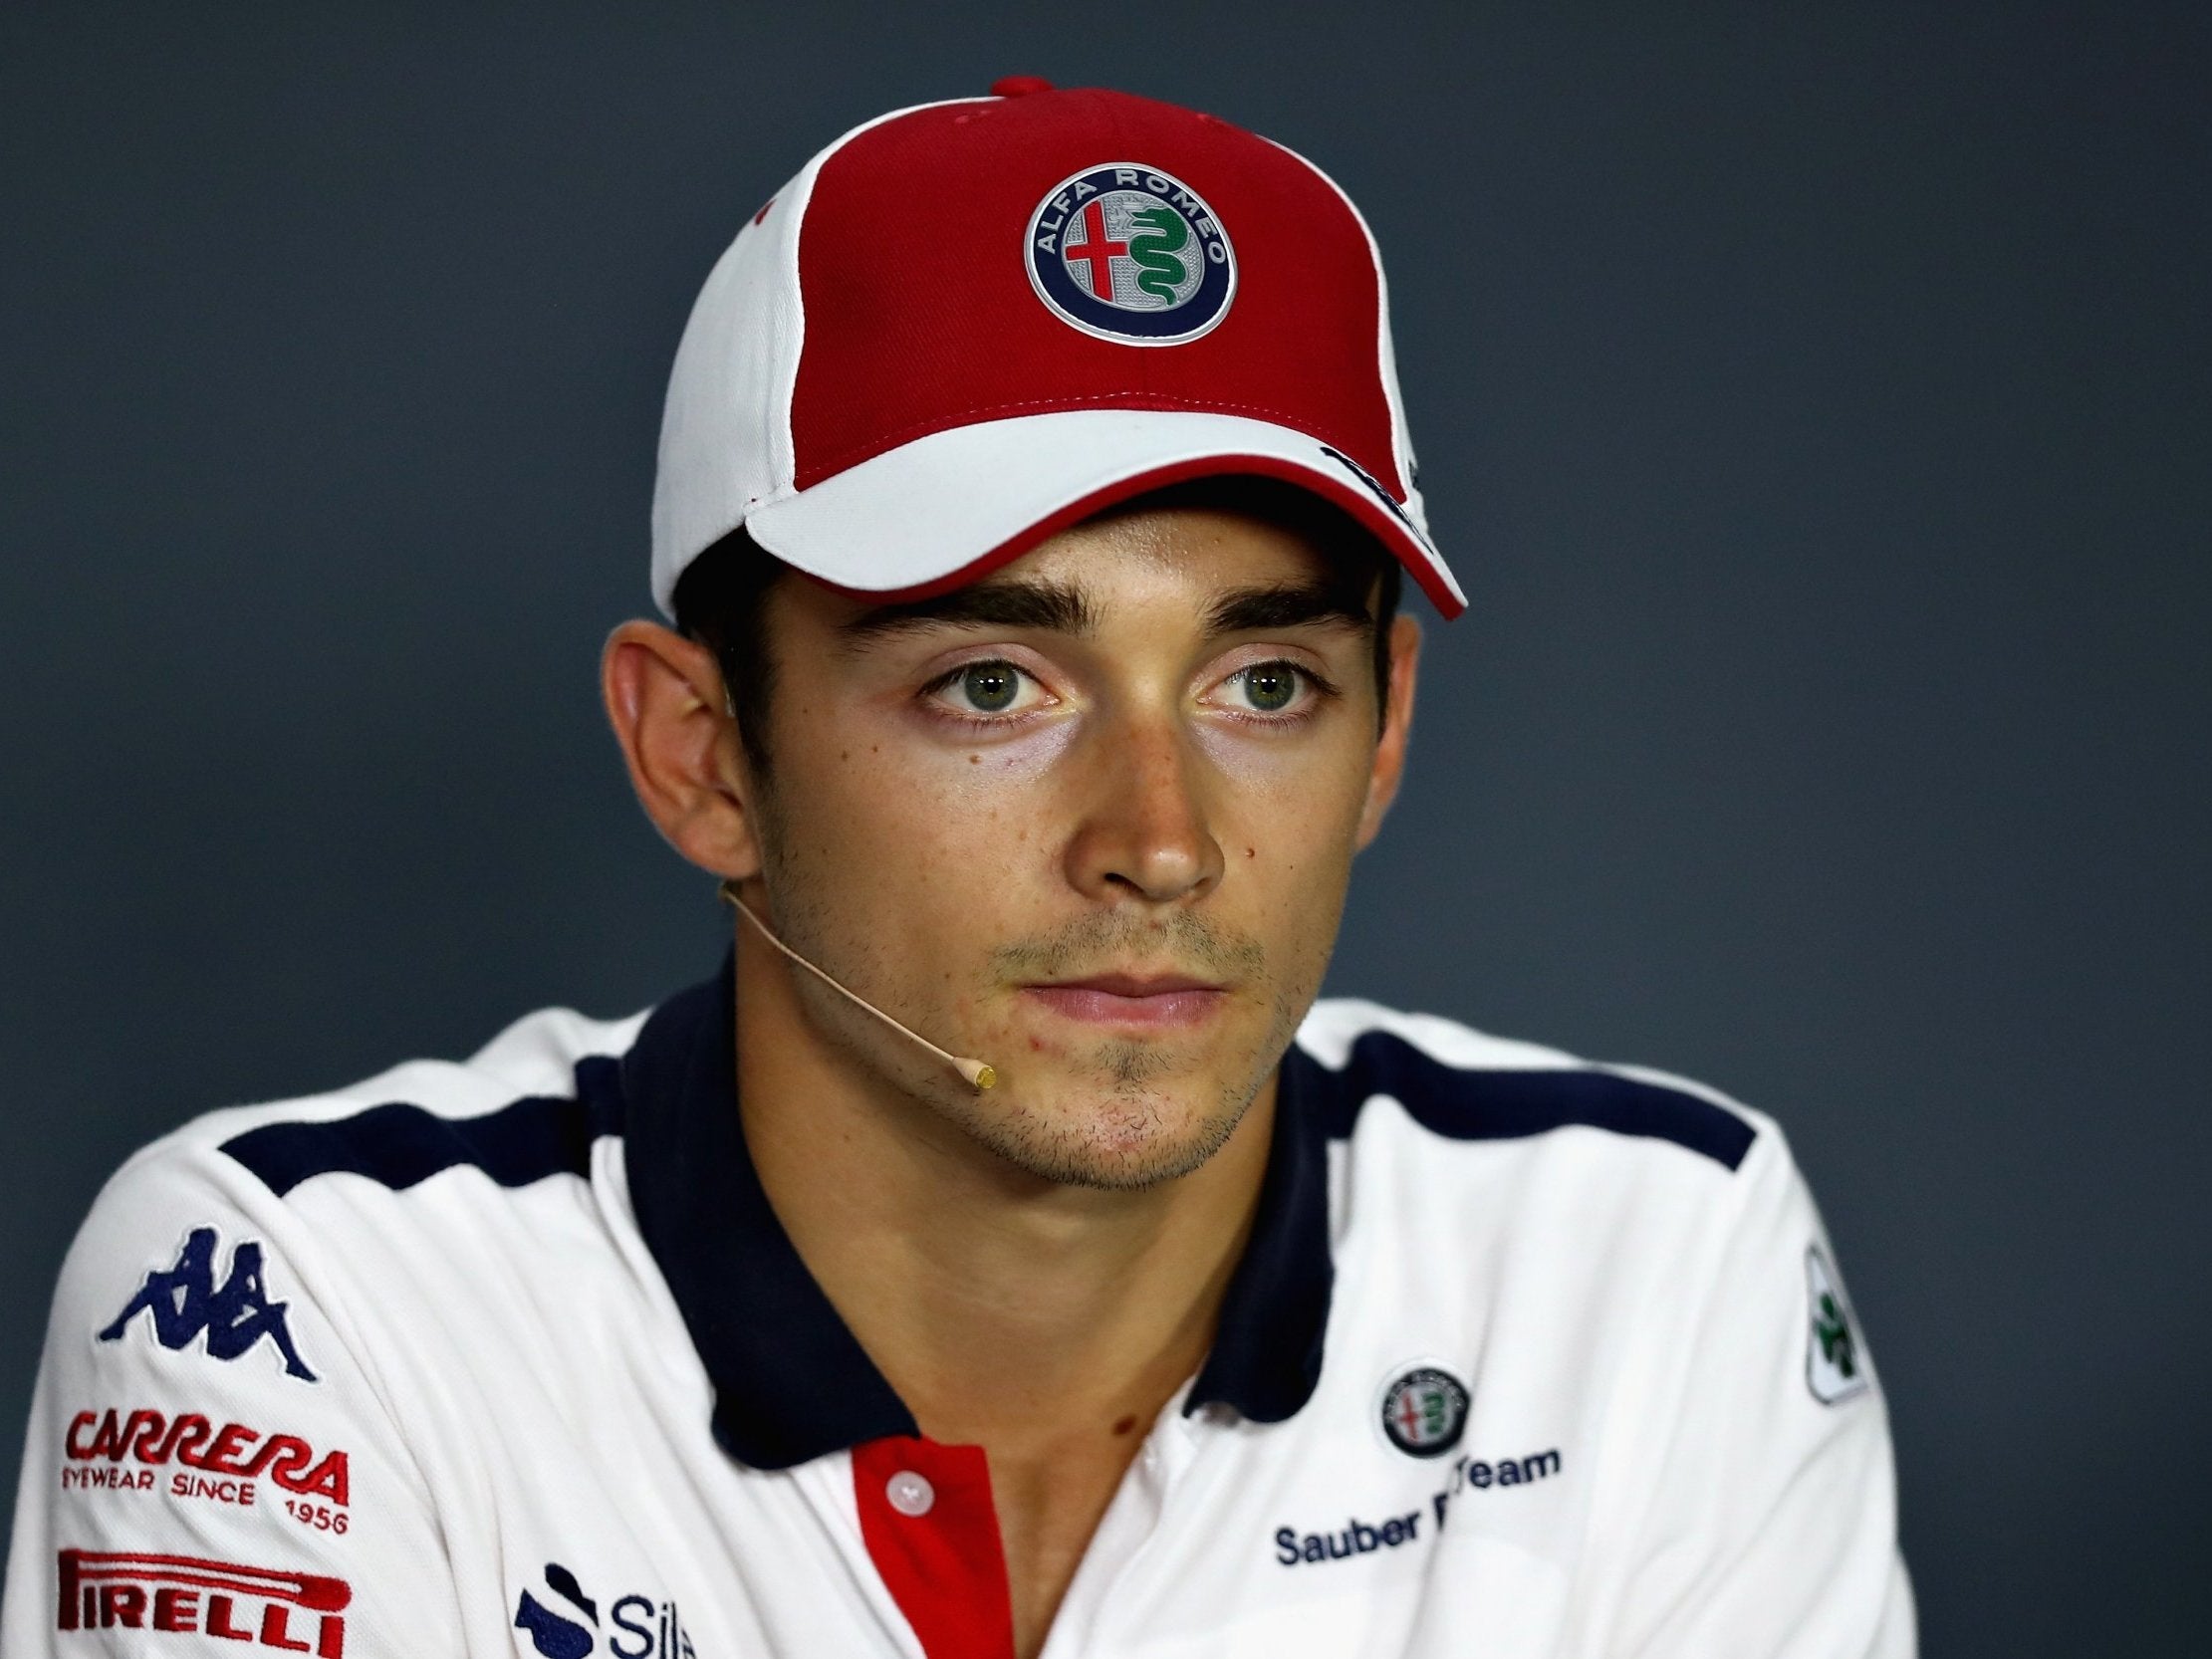 Leclerc will join Ferrari in 2019 and paid tribute to his later father as well as Bianchi